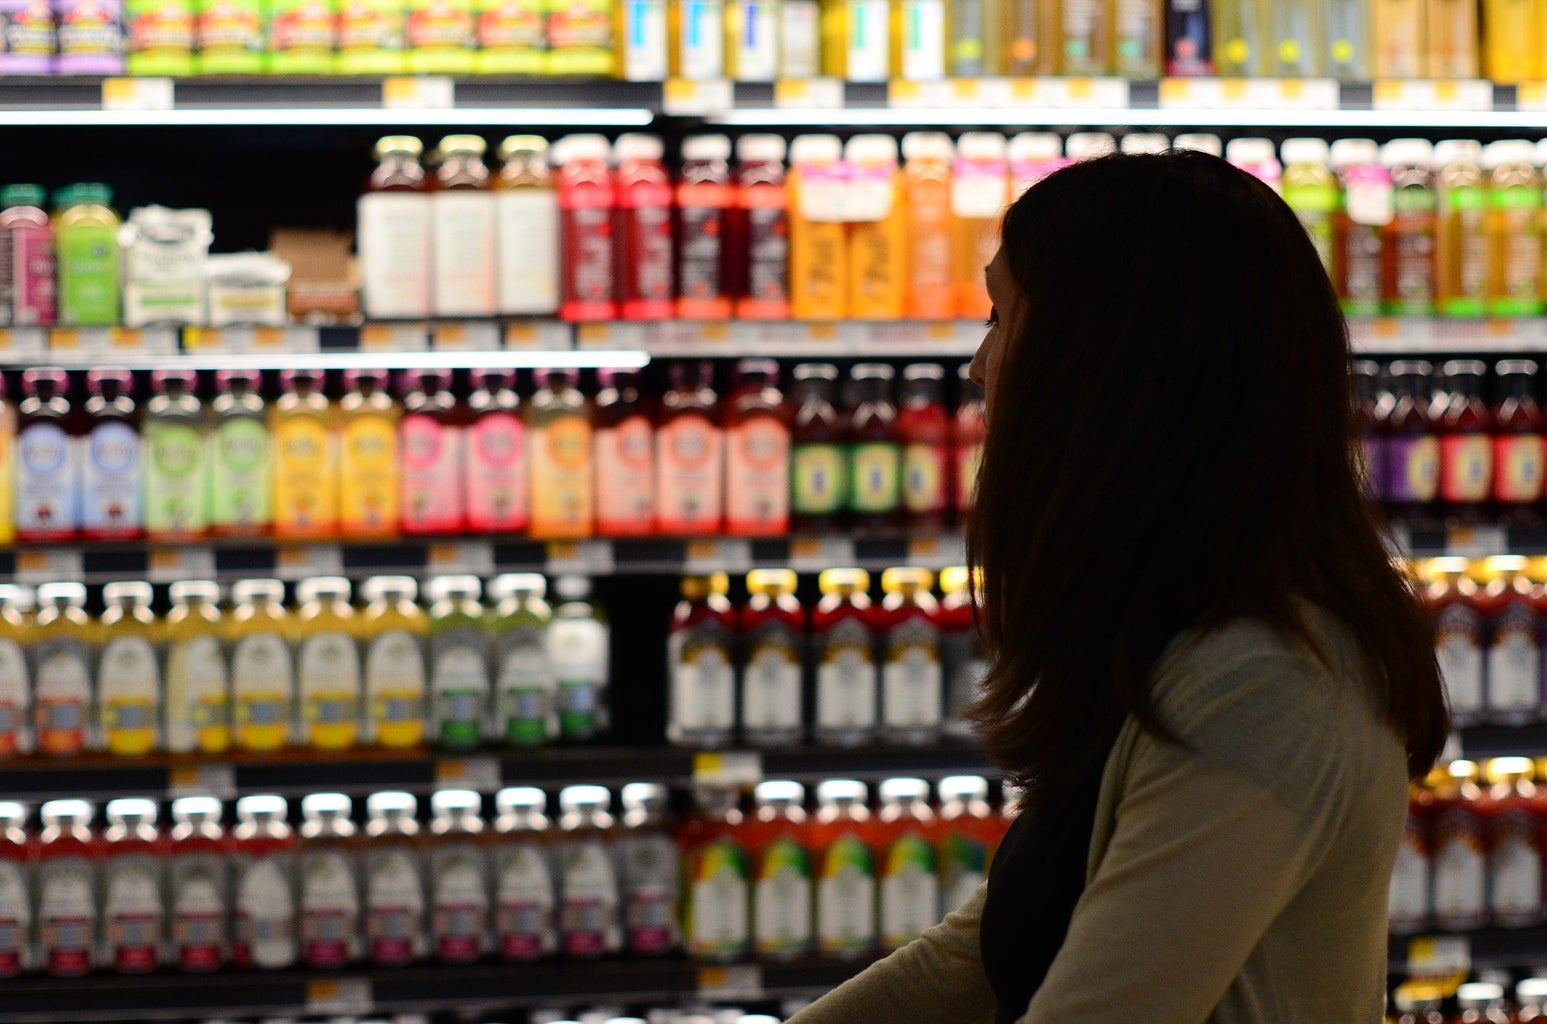 a woman stands in front of the health juice/kombucha shelves at a grocery store